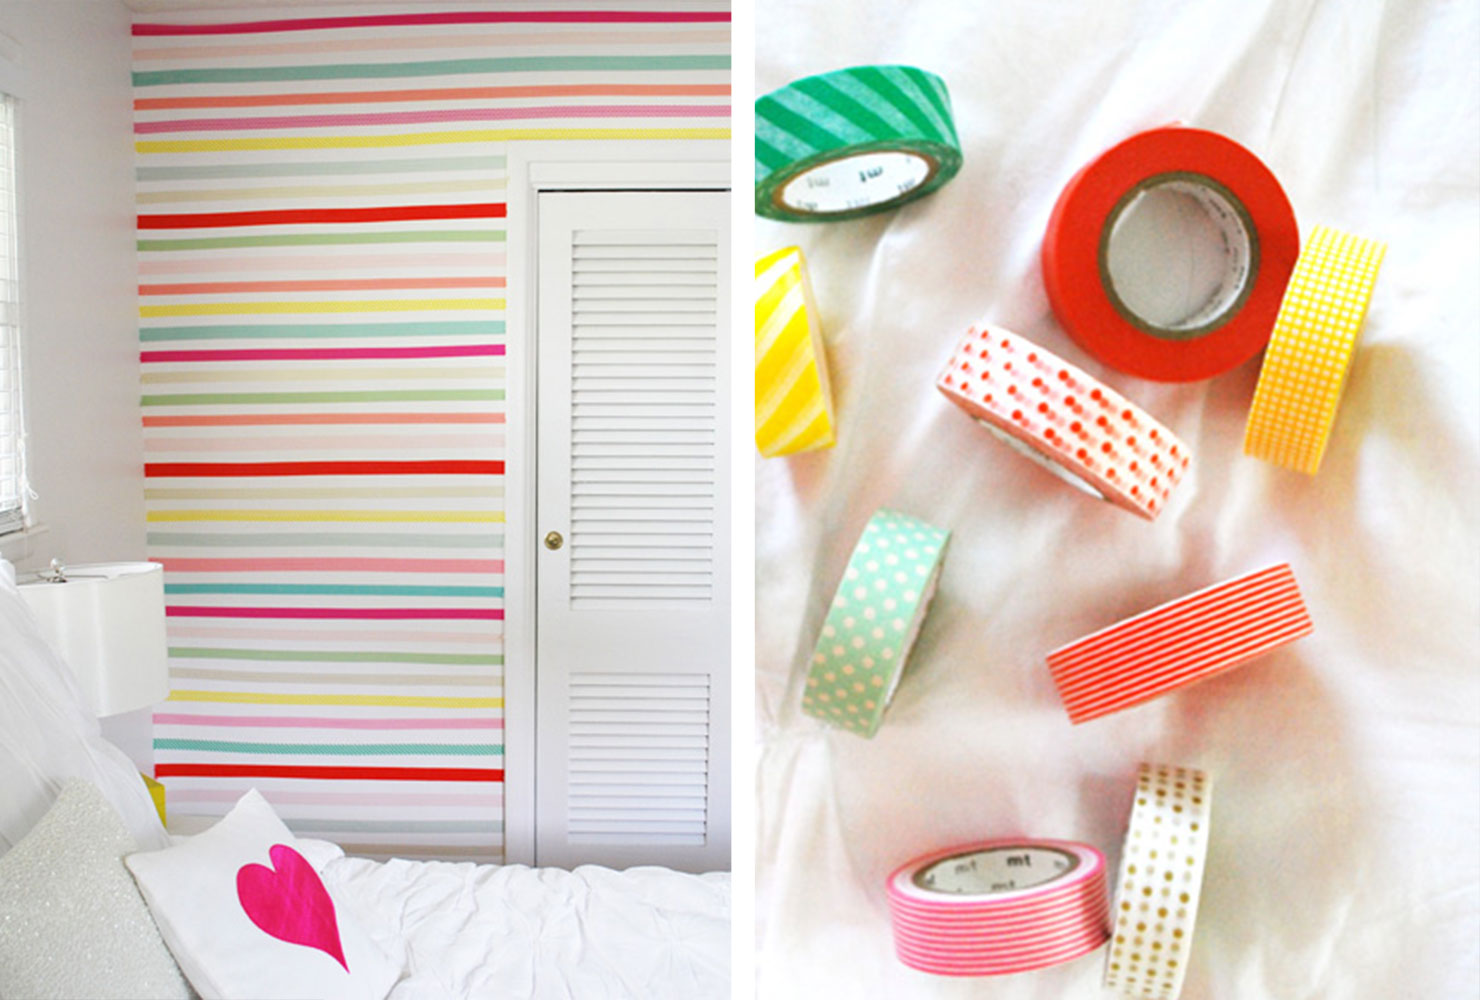 55+ DIY Room Decor Ideas to Decorate Your Home | Shutterfly